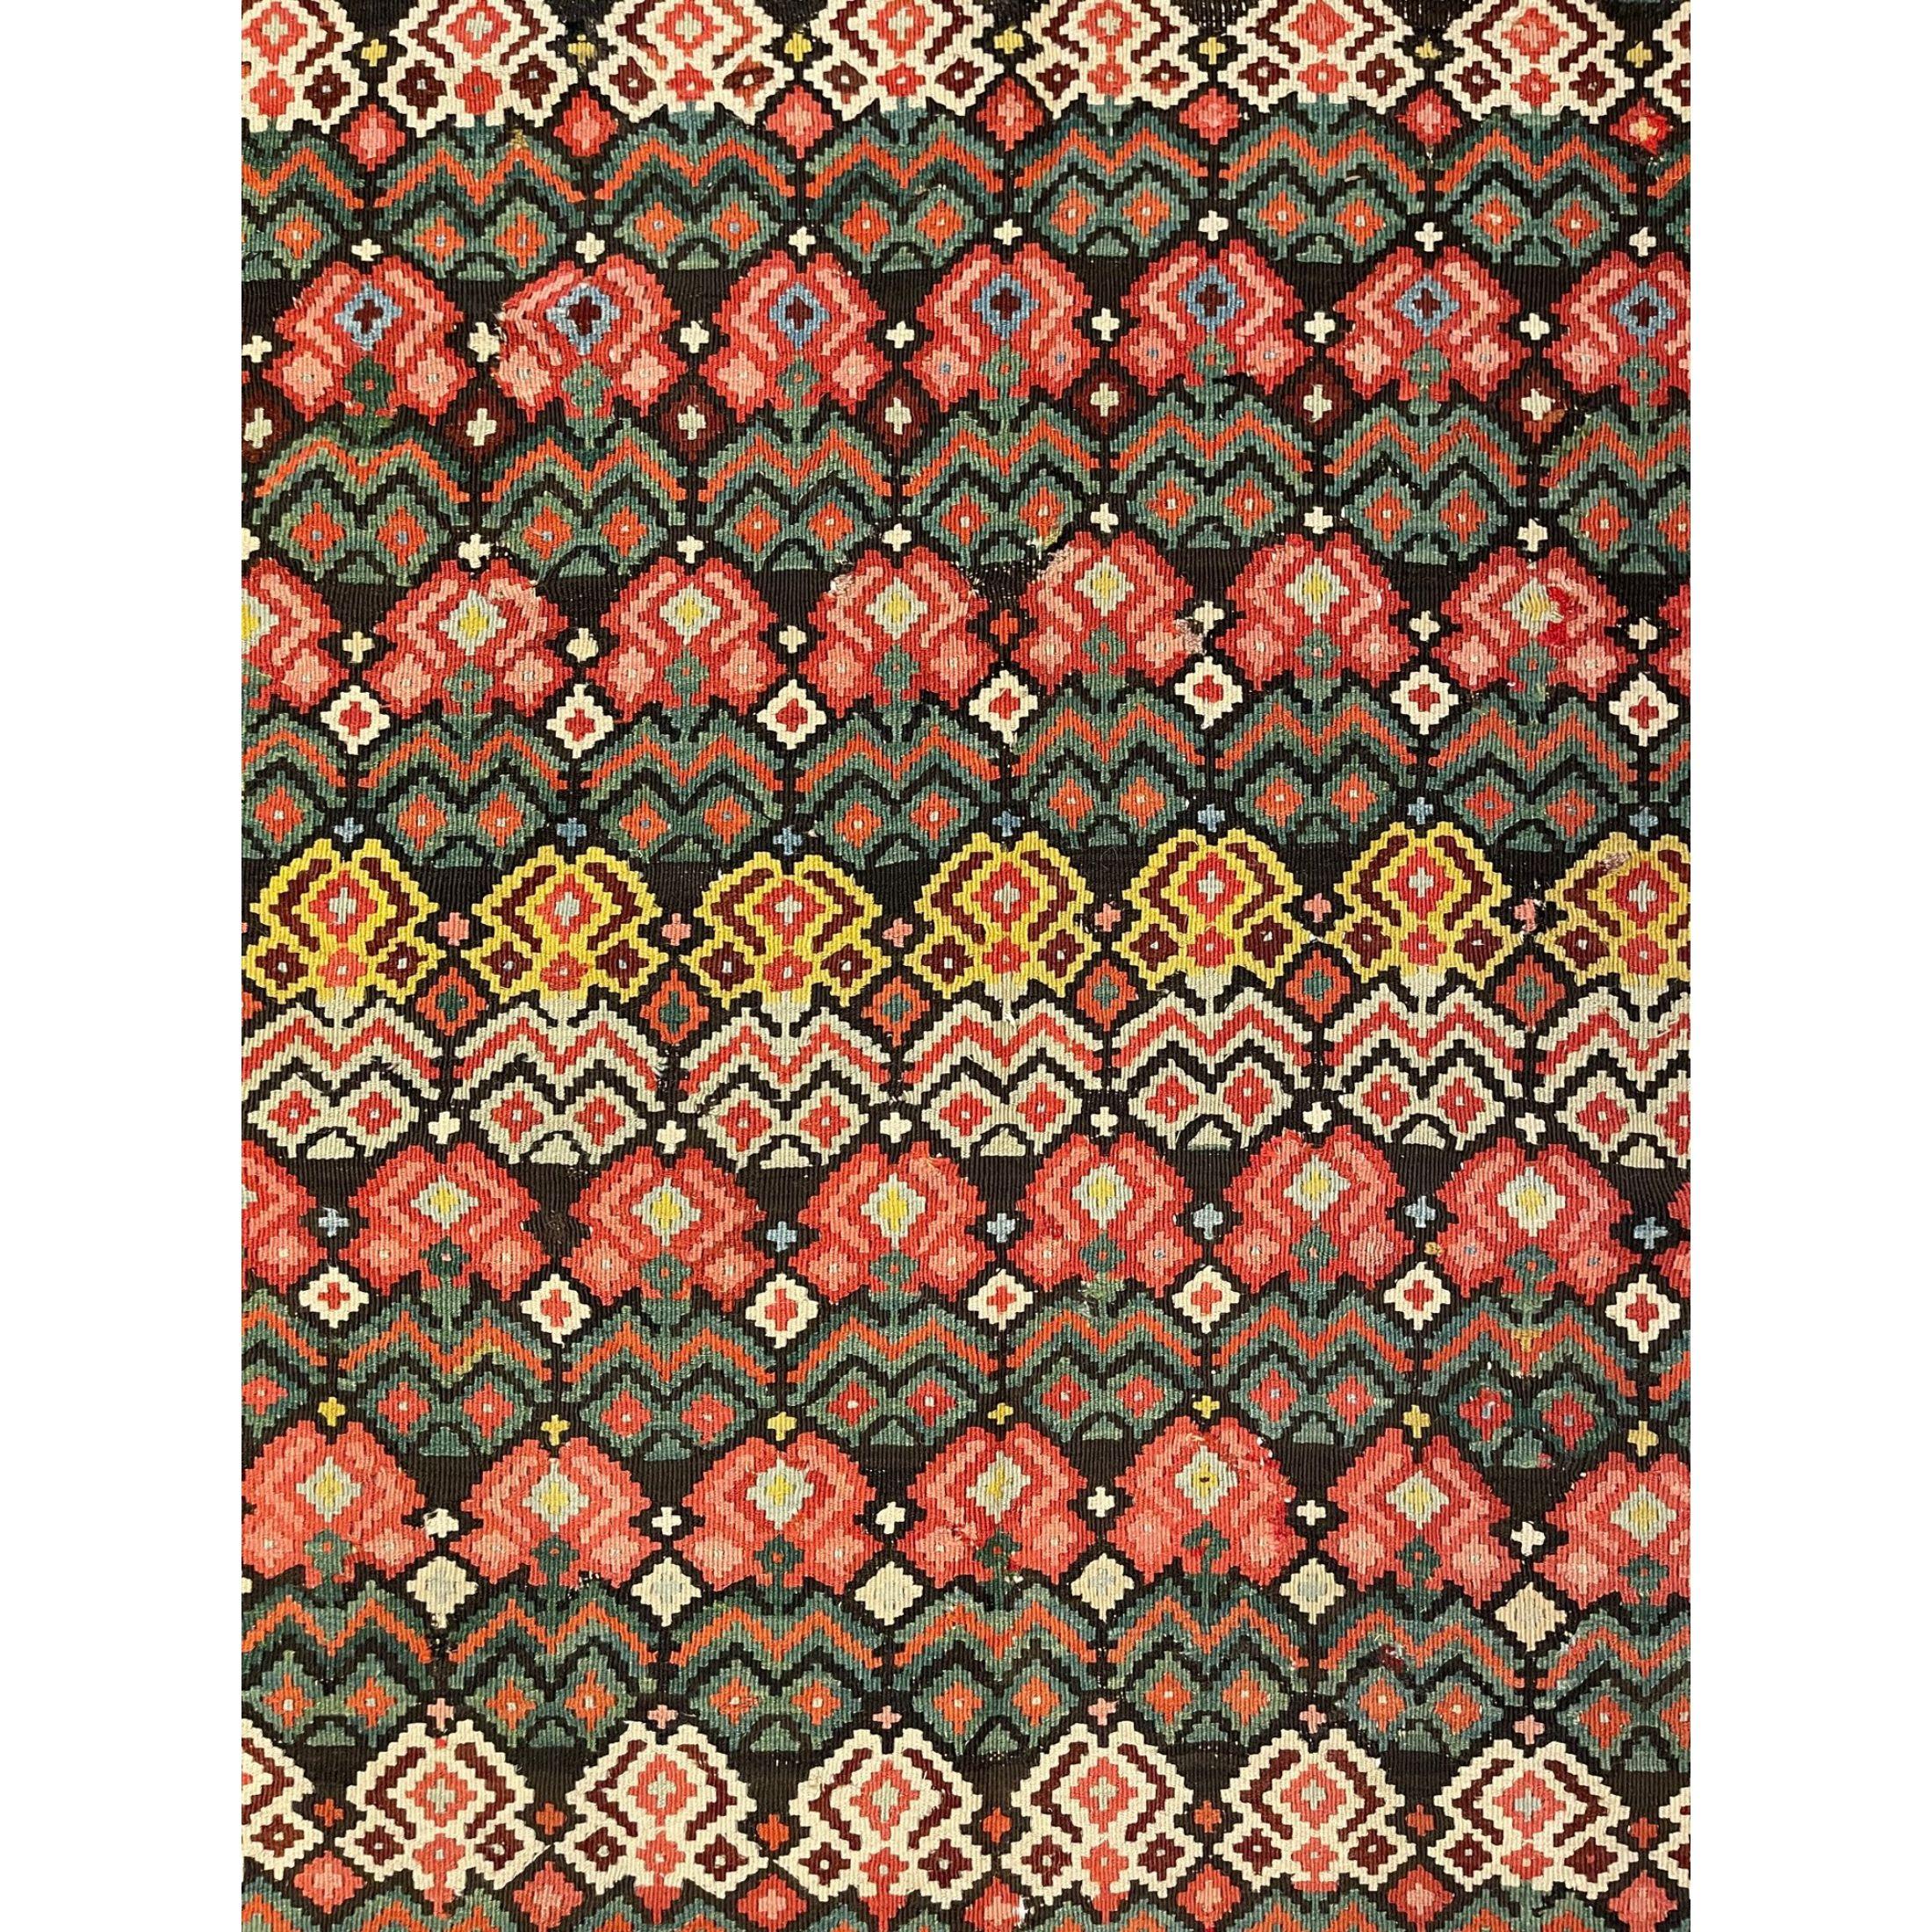 Antique rugs that are called “Kilim rugs”, primarily refer to a type of flat weave rug that was produced without knotted pile. Because these antique rugs are found across the globe, each region has a different pronunciation and spelling of the name